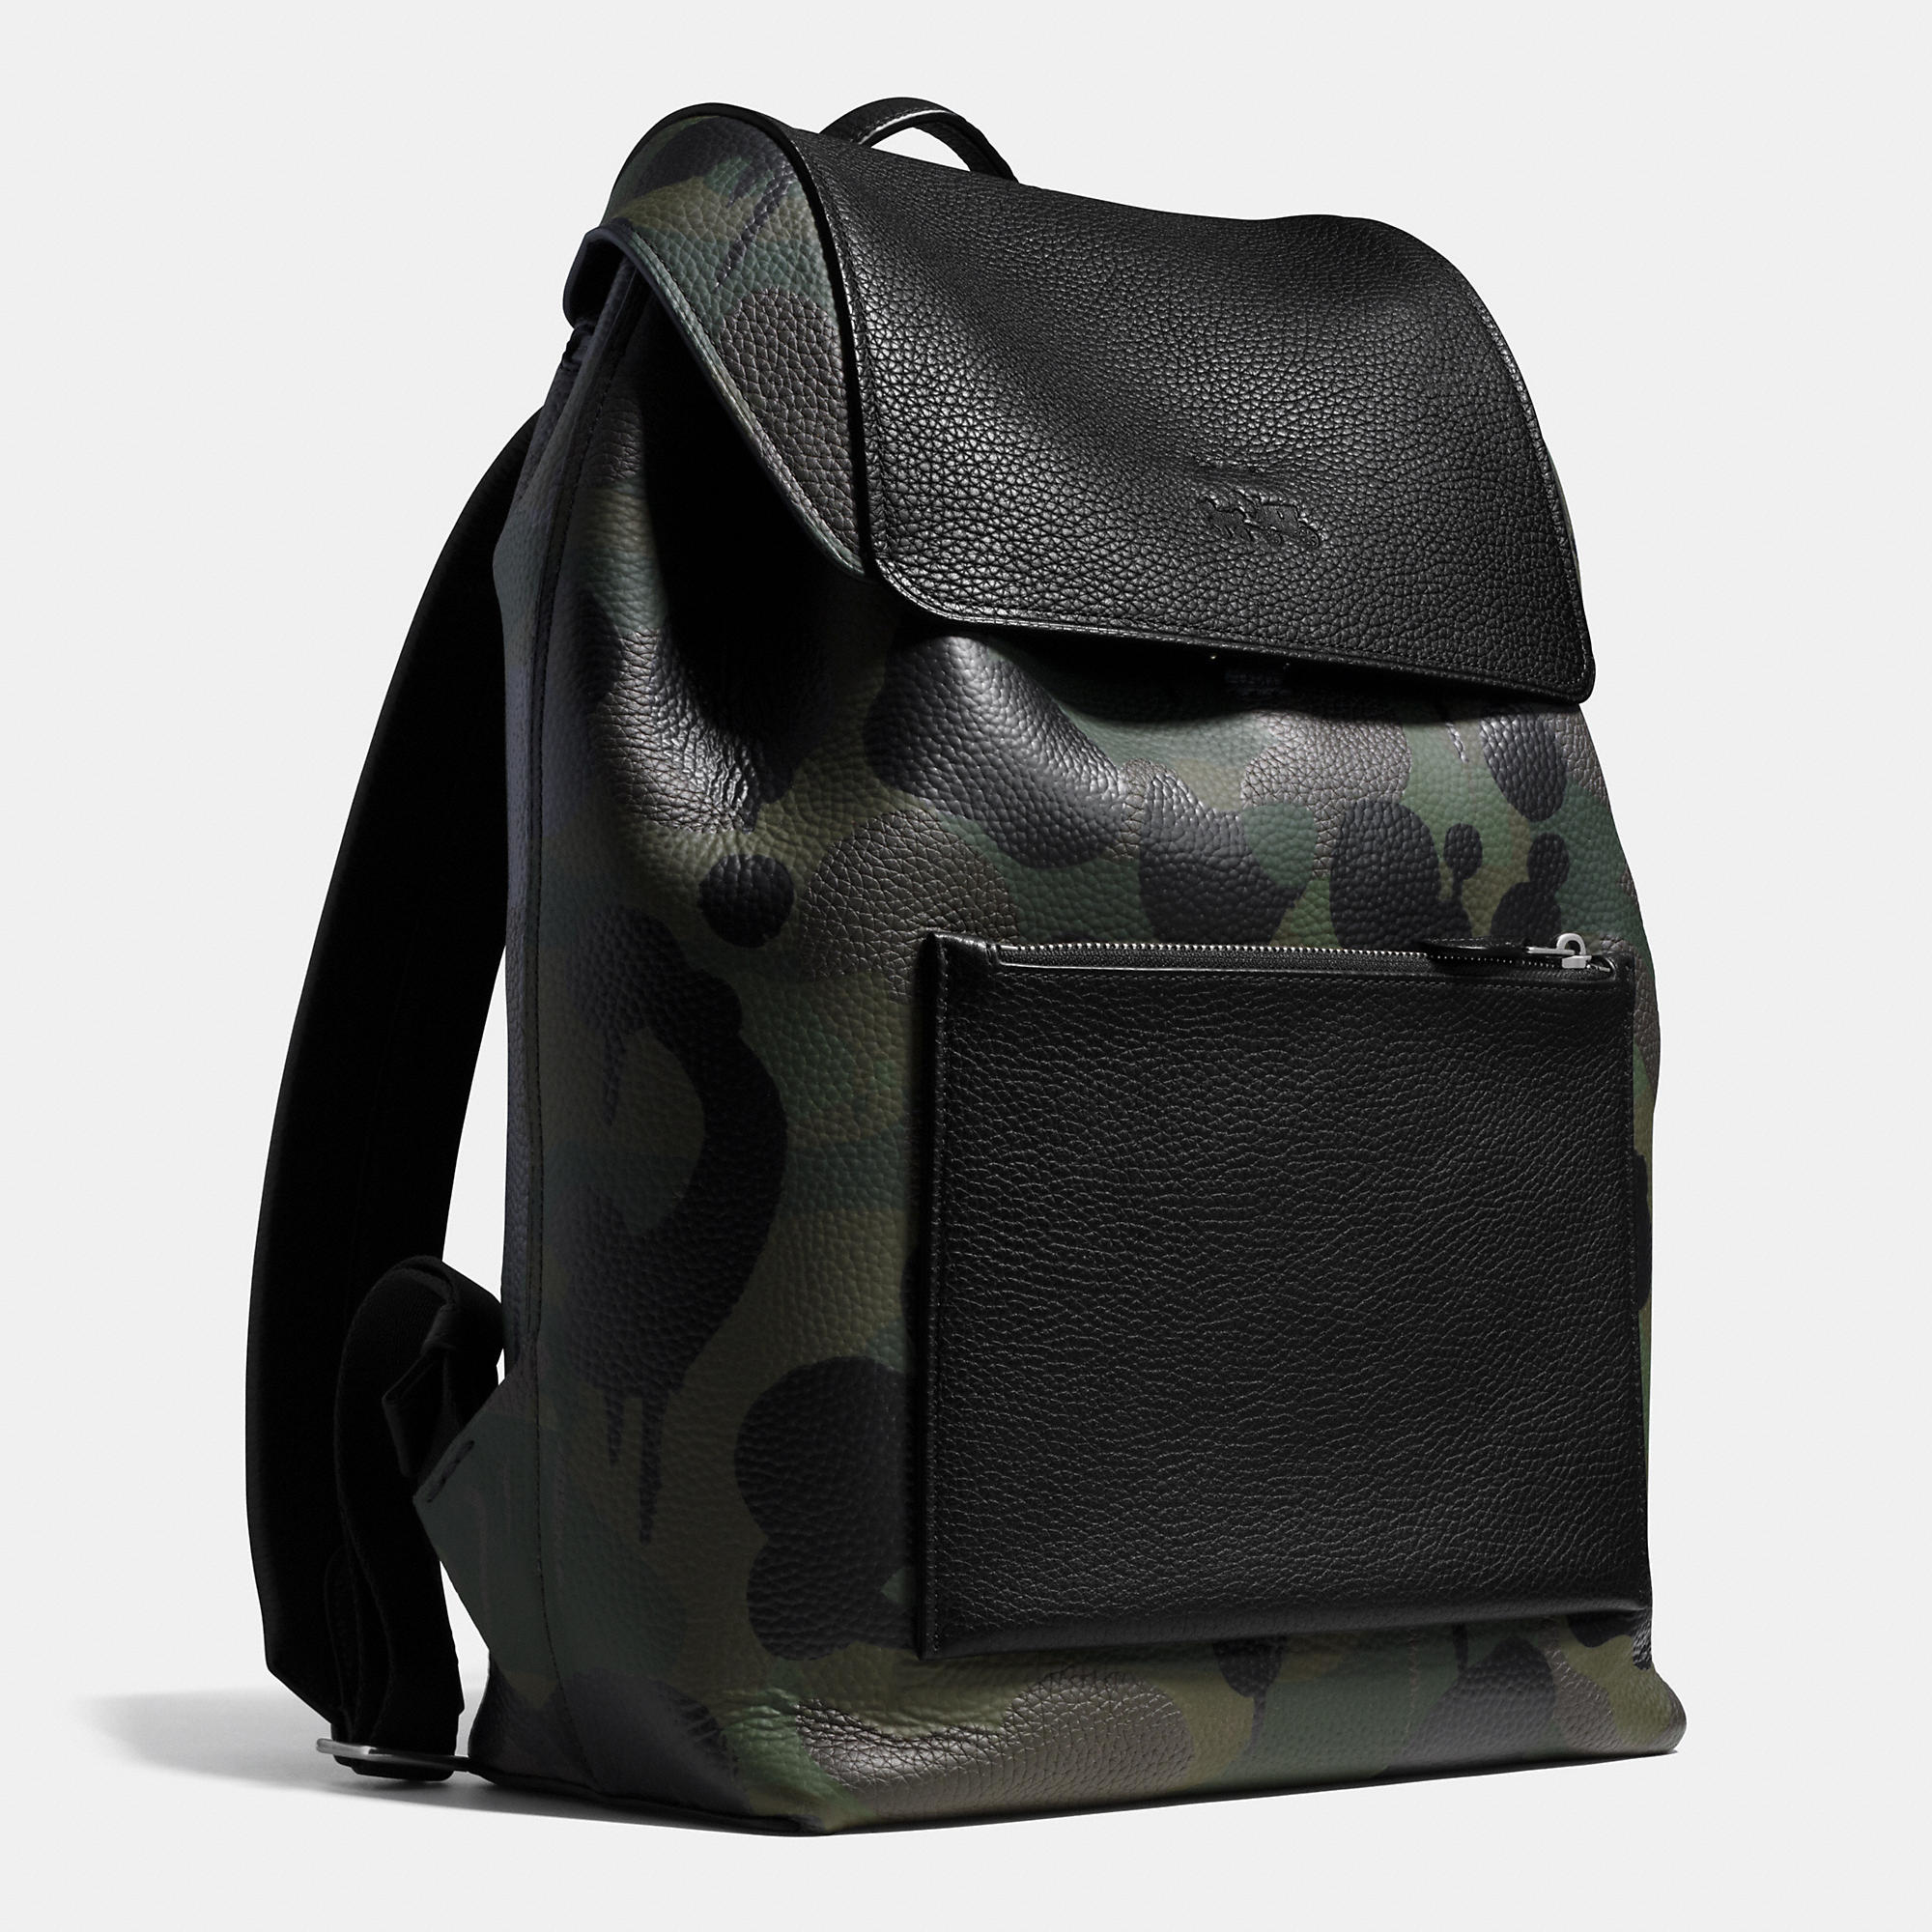 Lyst - Coach Manhattan Backpack In Military Wild Beast Print Leather in ...